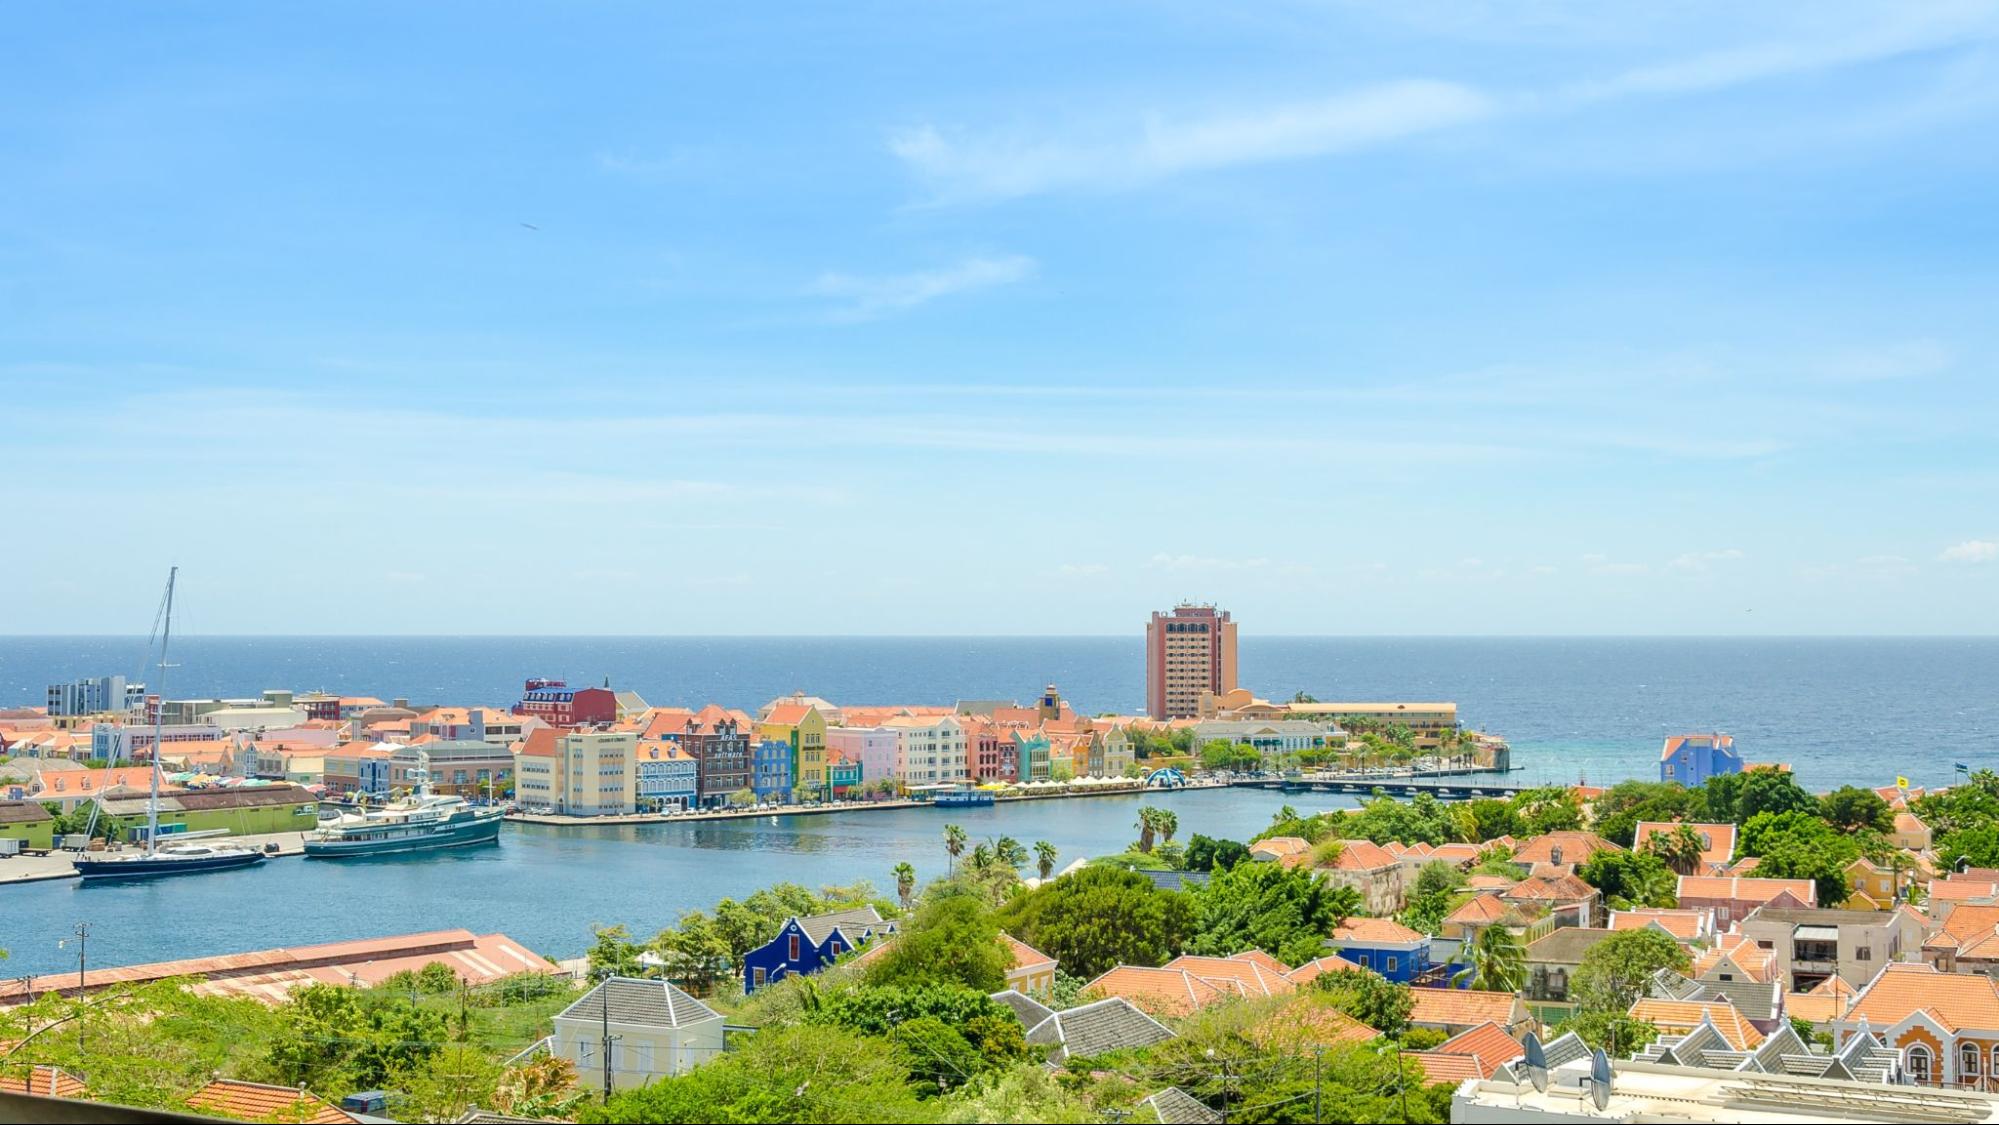 View of Willemstad downtown with colorful facades in Handelskade Curacao